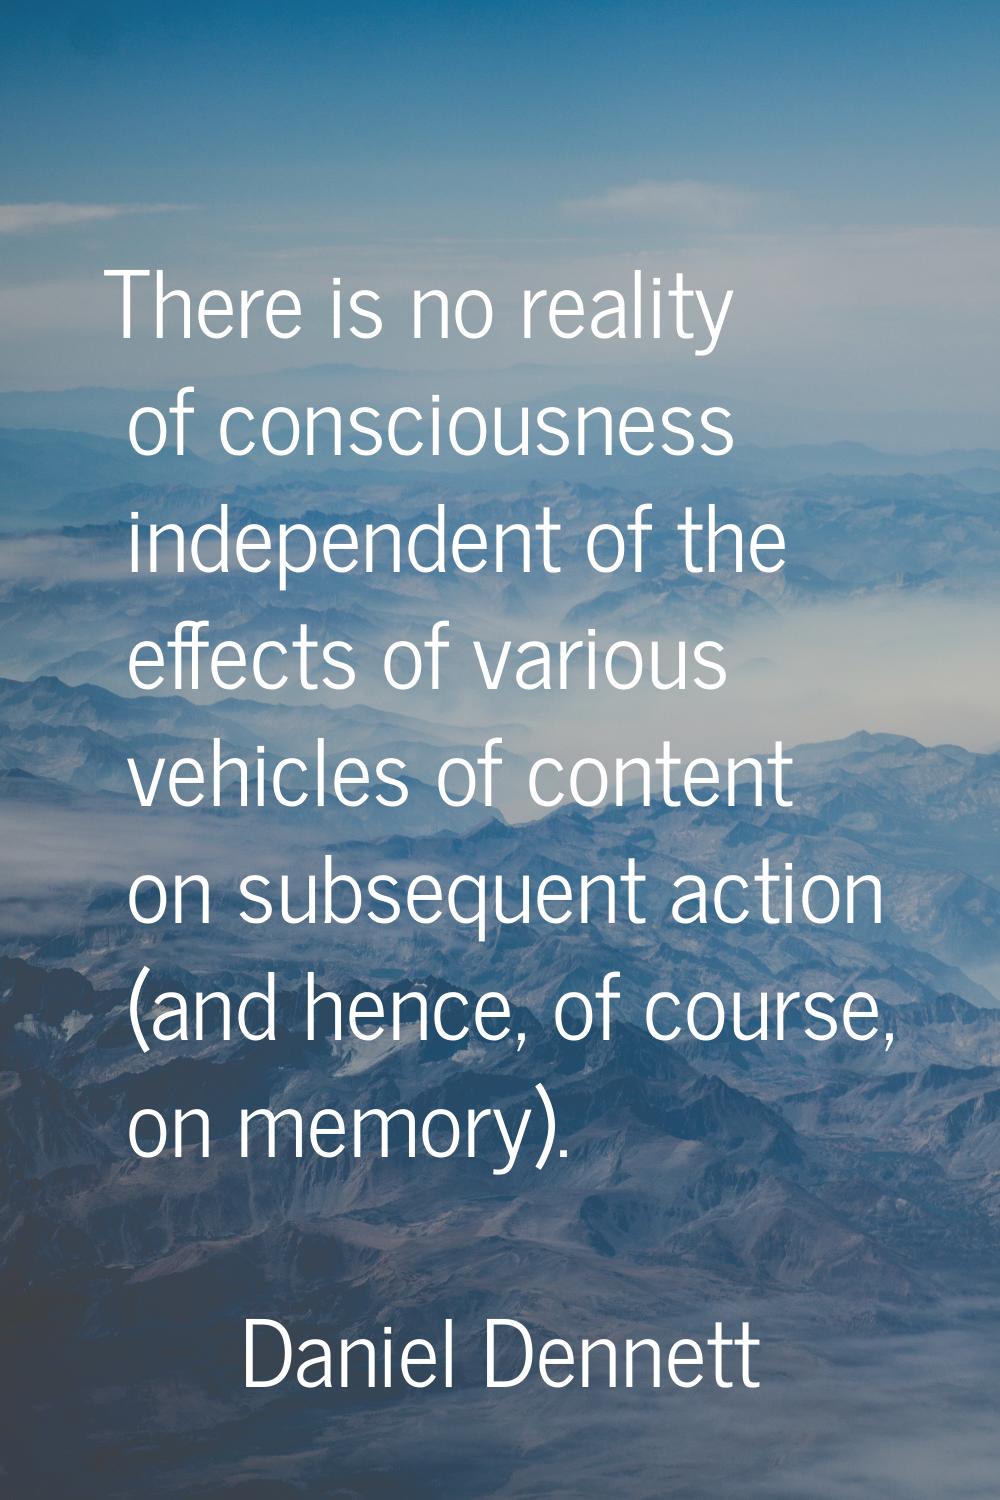 There is no reality of consciousness independent of the effects of various vehicles of content on s